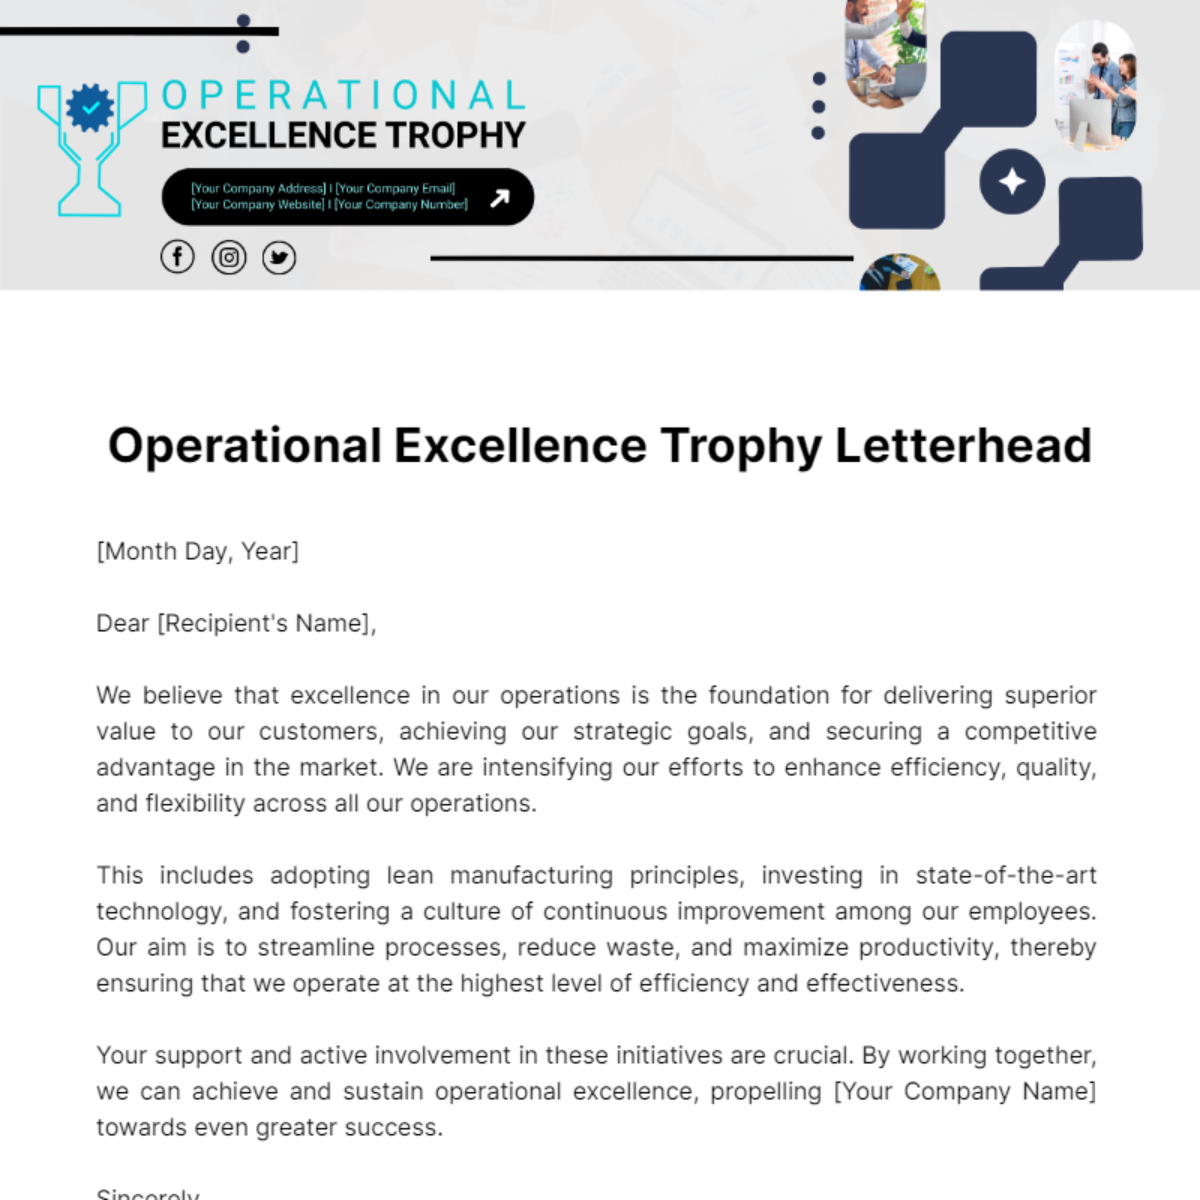 Free Operational Excellence Trophy Letterhead Template